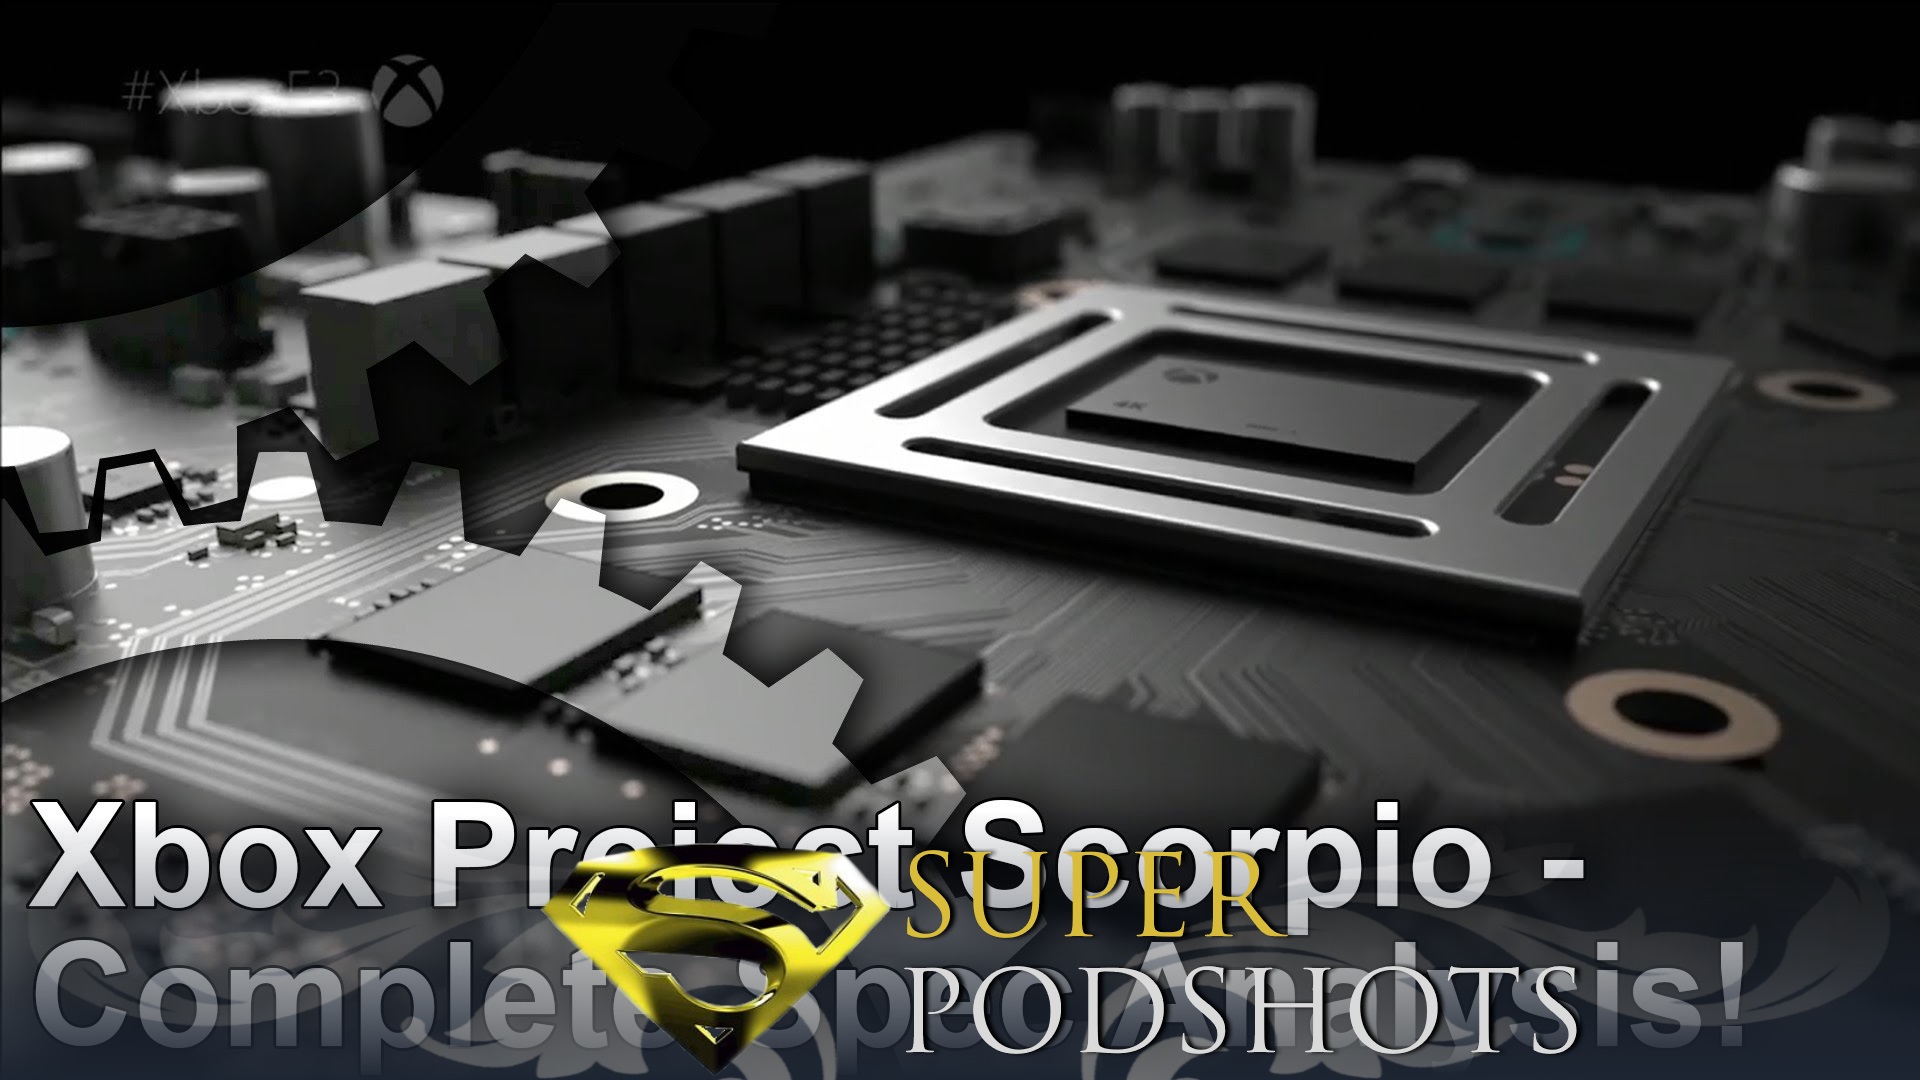 Super Podshots Ep. 67 - Scorpio: When The Unexpected Exceeds Hype